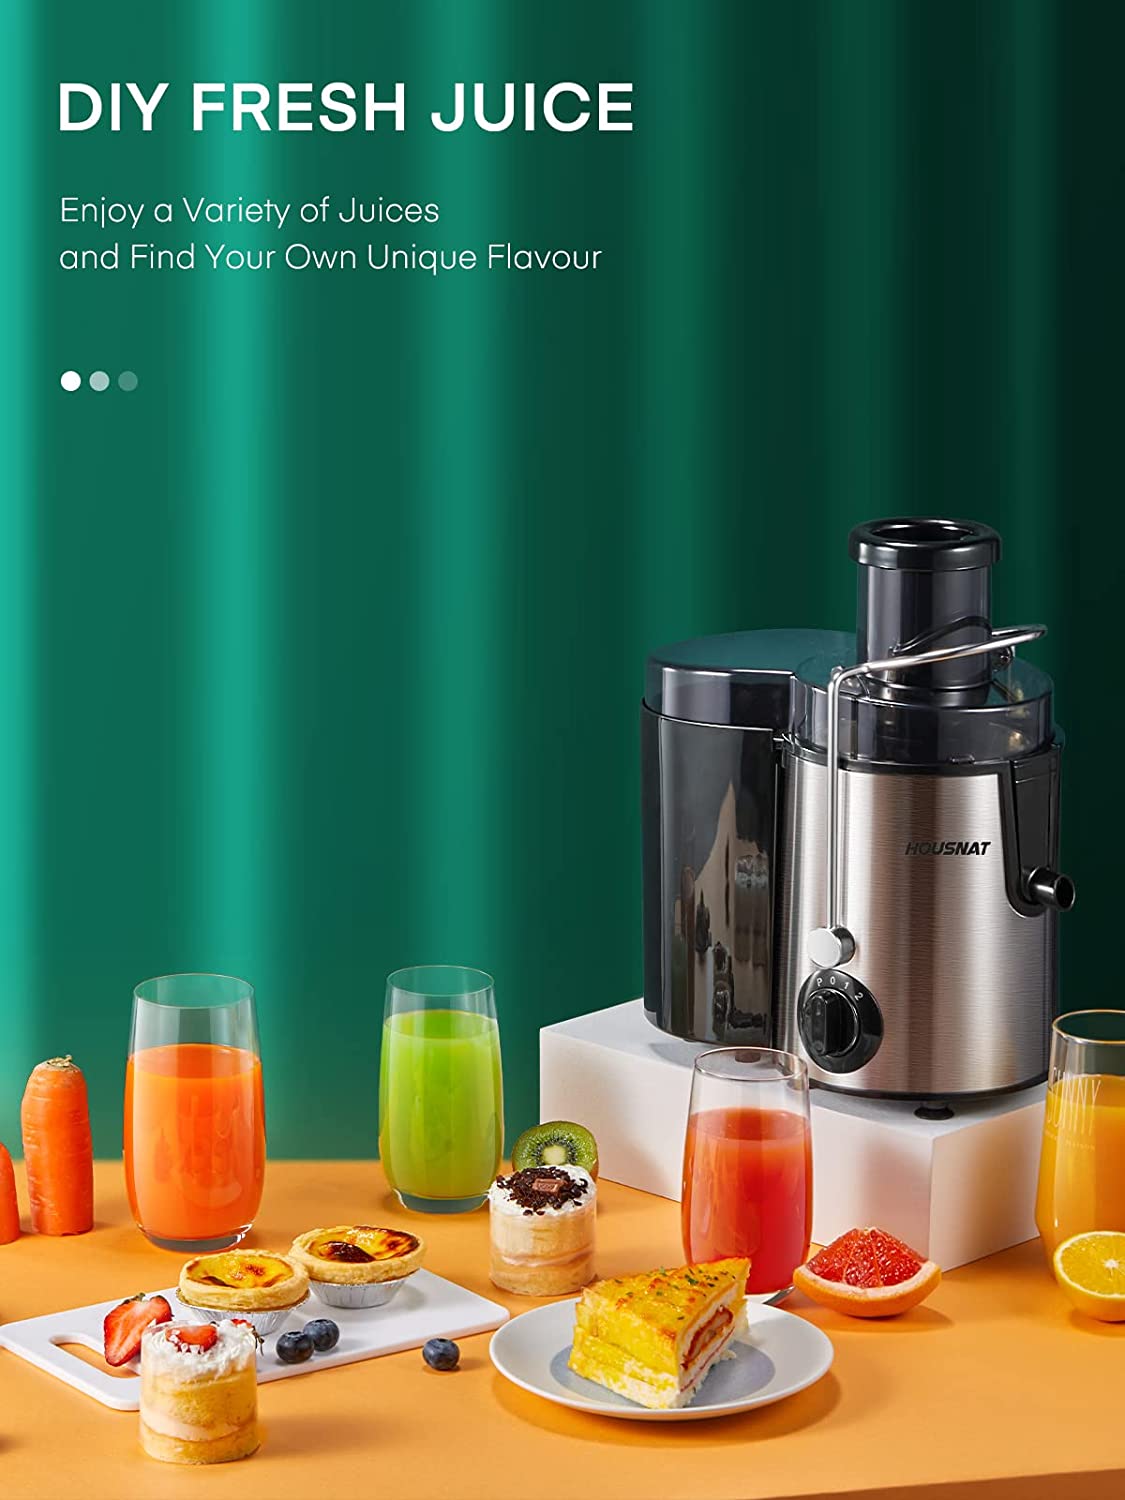 diy fresh juice, Juicer, HOUSNAT Juicer Machines Vegetable and Fruit with 3-Speed Setting, Upgraded Version 400W Motor Quick Juicing, Juicing Recipe Included